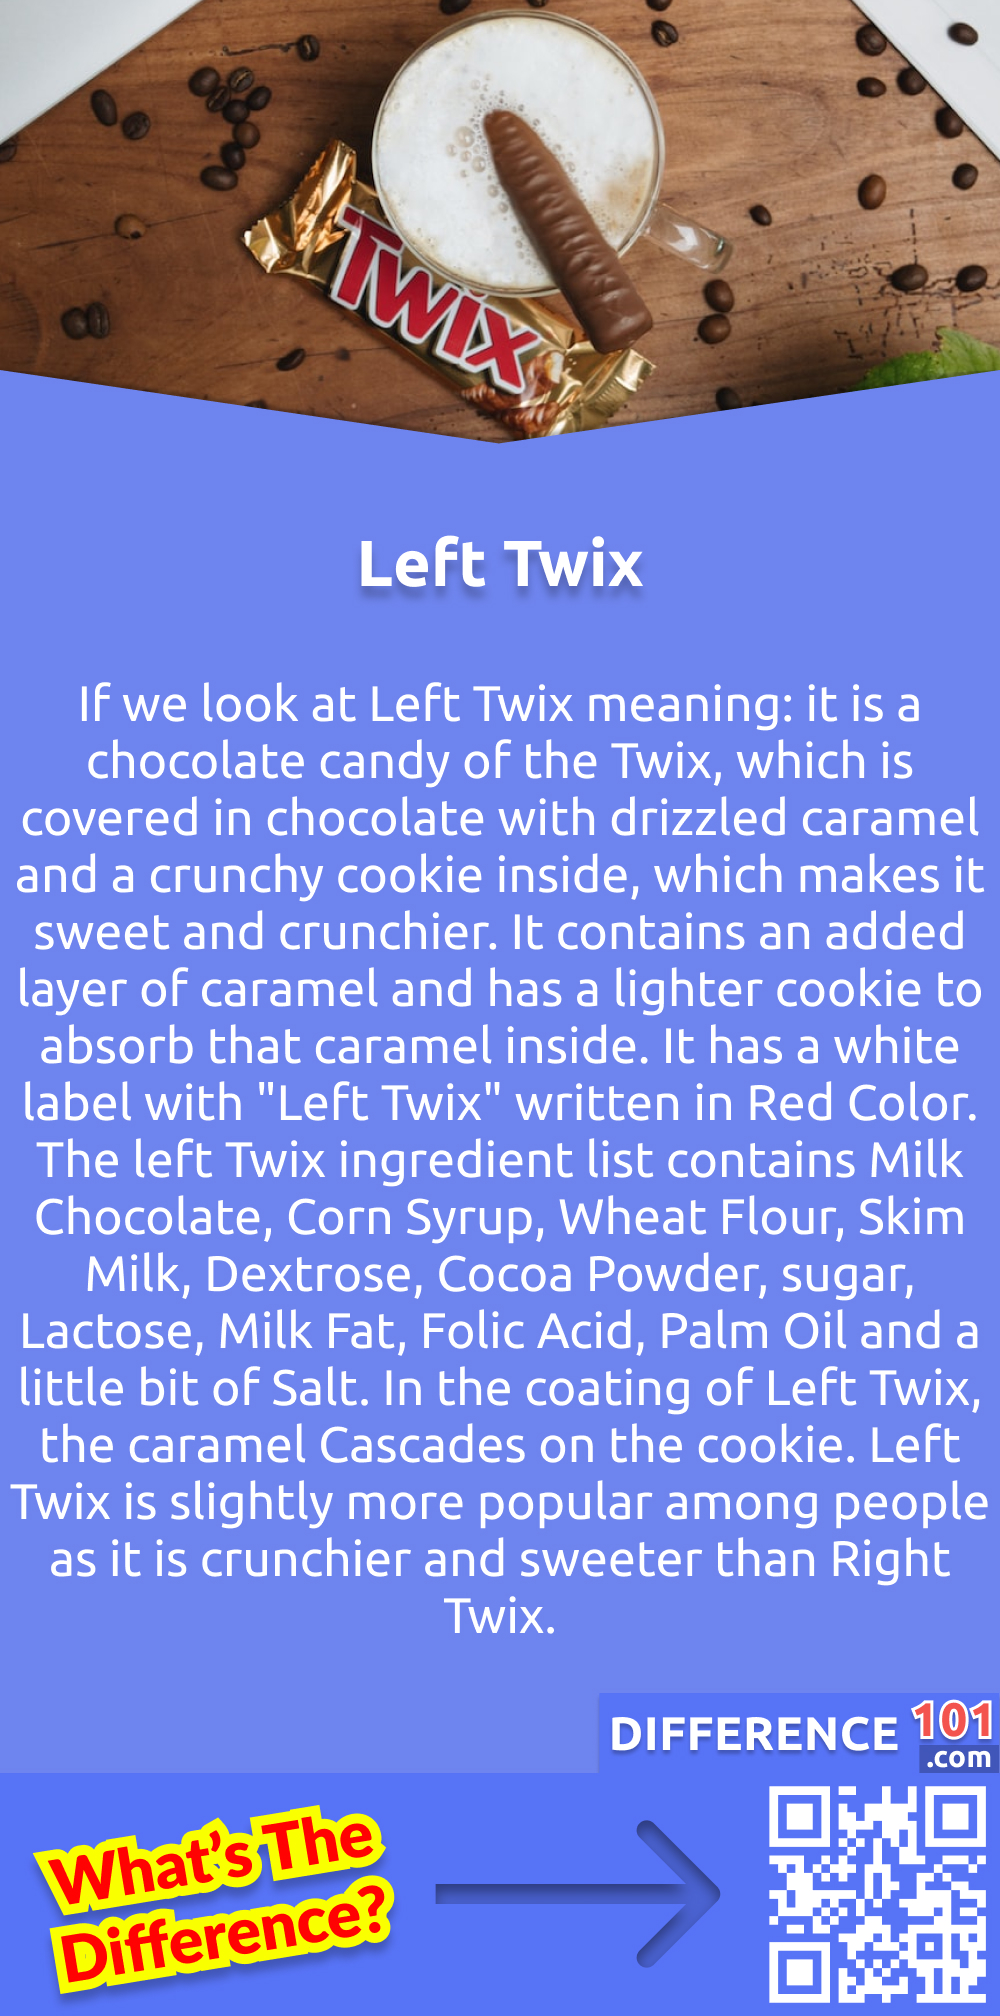 What is Left Twix? If we look at Left Twix meaning: it is a chocolate candy of the Twix, which is covered in chocolate with drizzled caramel and a crunchy cookie inside, which makes it sweet and crunchier. It contains an added layer of caramel and has a lighter cookie to absorb that caramel inside. It has a white label with "Left Twix" written in Red Color. The left Twix ingredient list contains Milk Chocolate, Corn Syrup, Wheat Flour, Skim Milk, Dextrose, Cocoa Powder, sugar, Lactose, Milk Fat, Folic Acid, Palm Oil and a little bit of Salt. In the coating of Left Twix, the caramel Cascades on the cookie. Left Twix is slightly more popular among people as it is crunchier and sweeter than Right Twix.